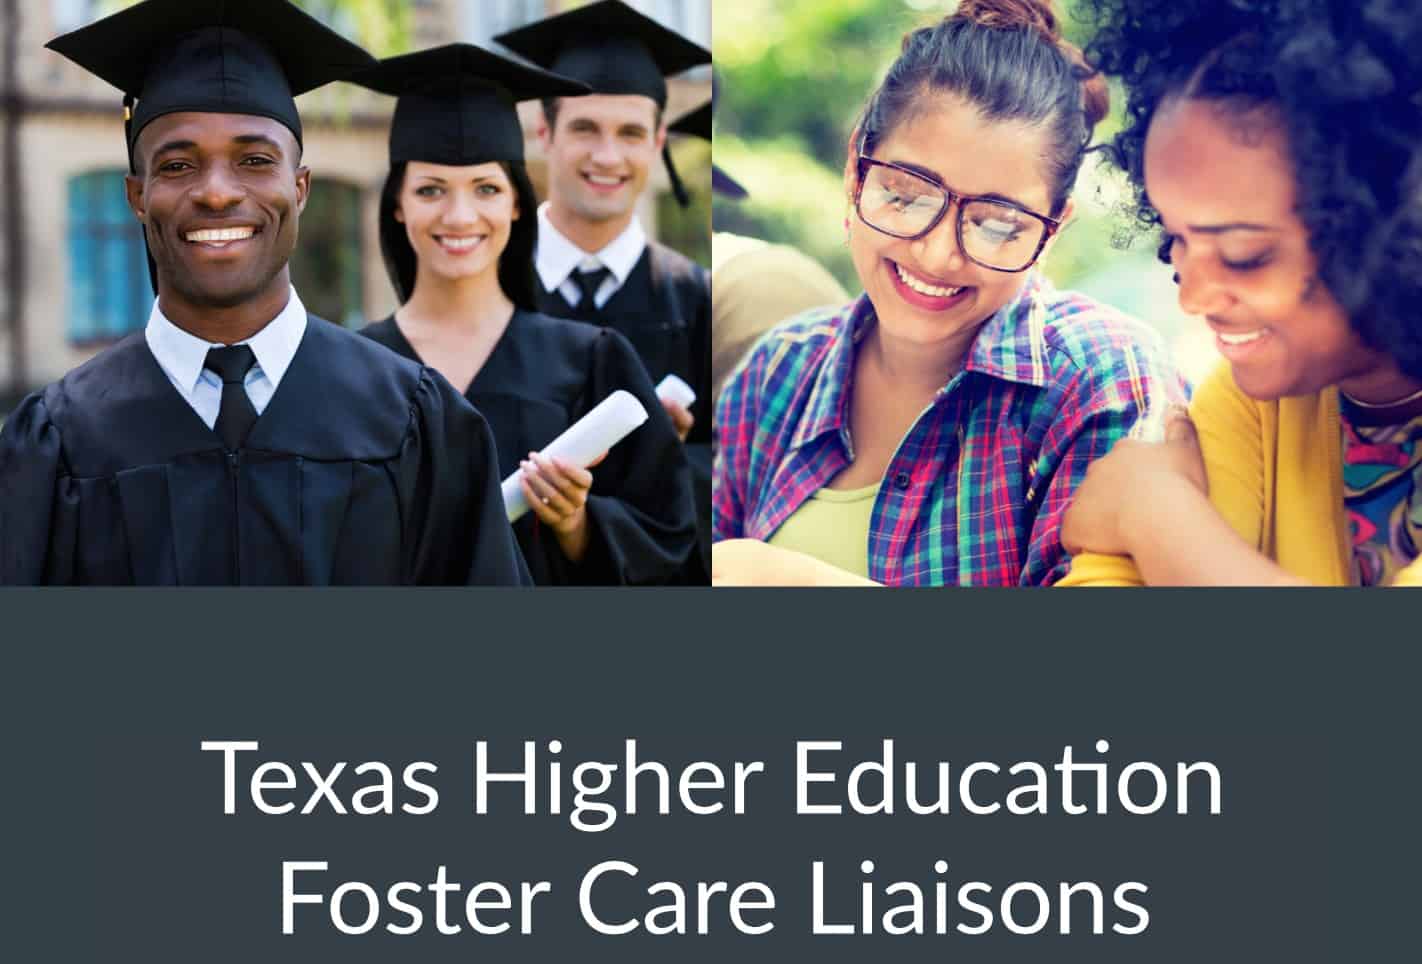 Foster care liasions